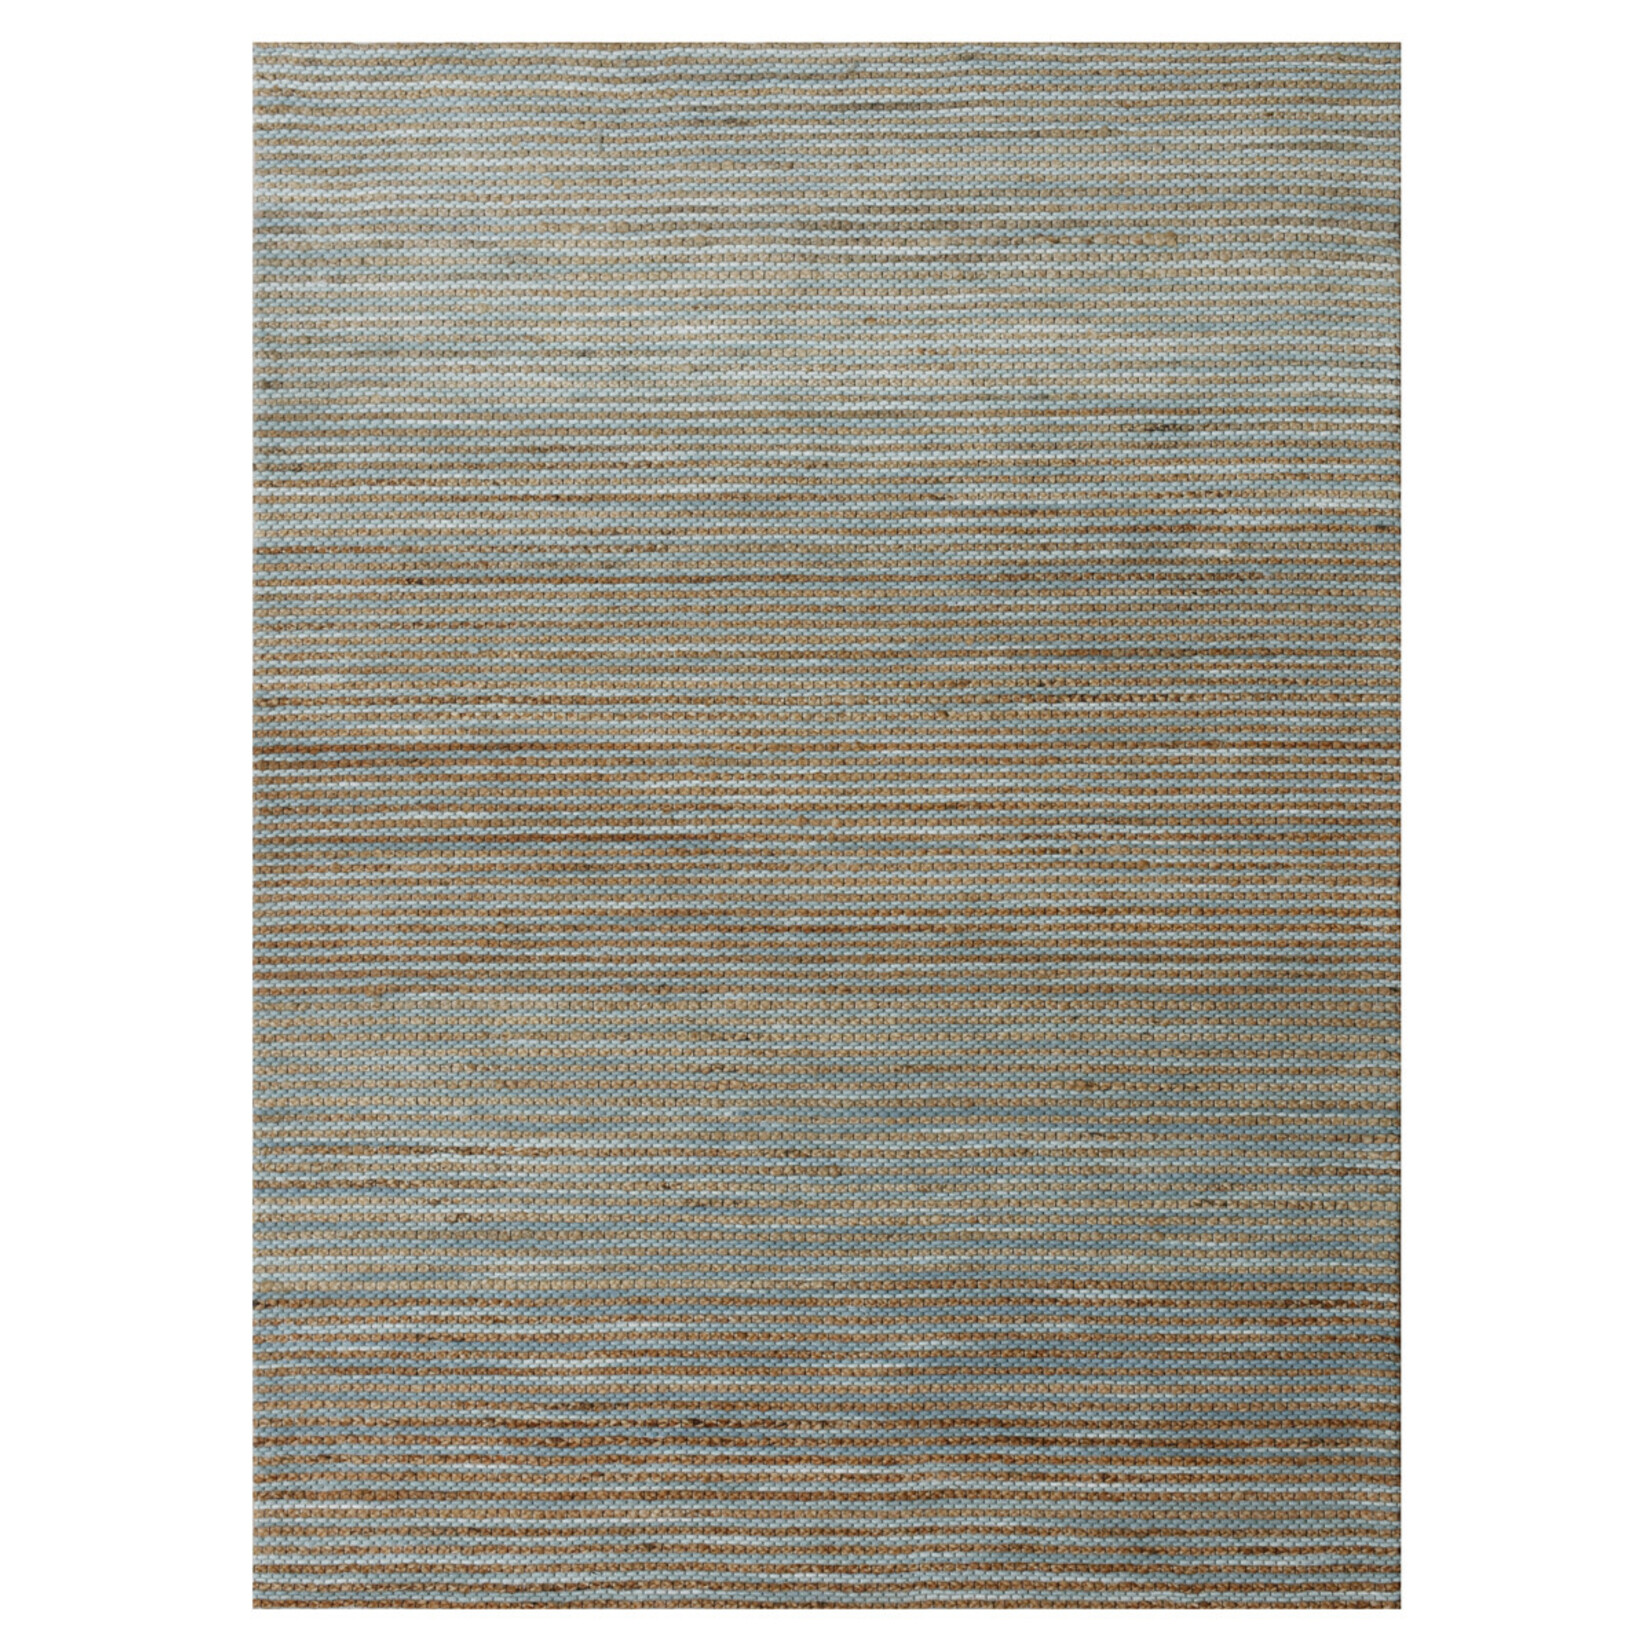 Outside The Box 9' x 12' Rondane Jute / Wool Blend Area Rug In Turquoise - 03425